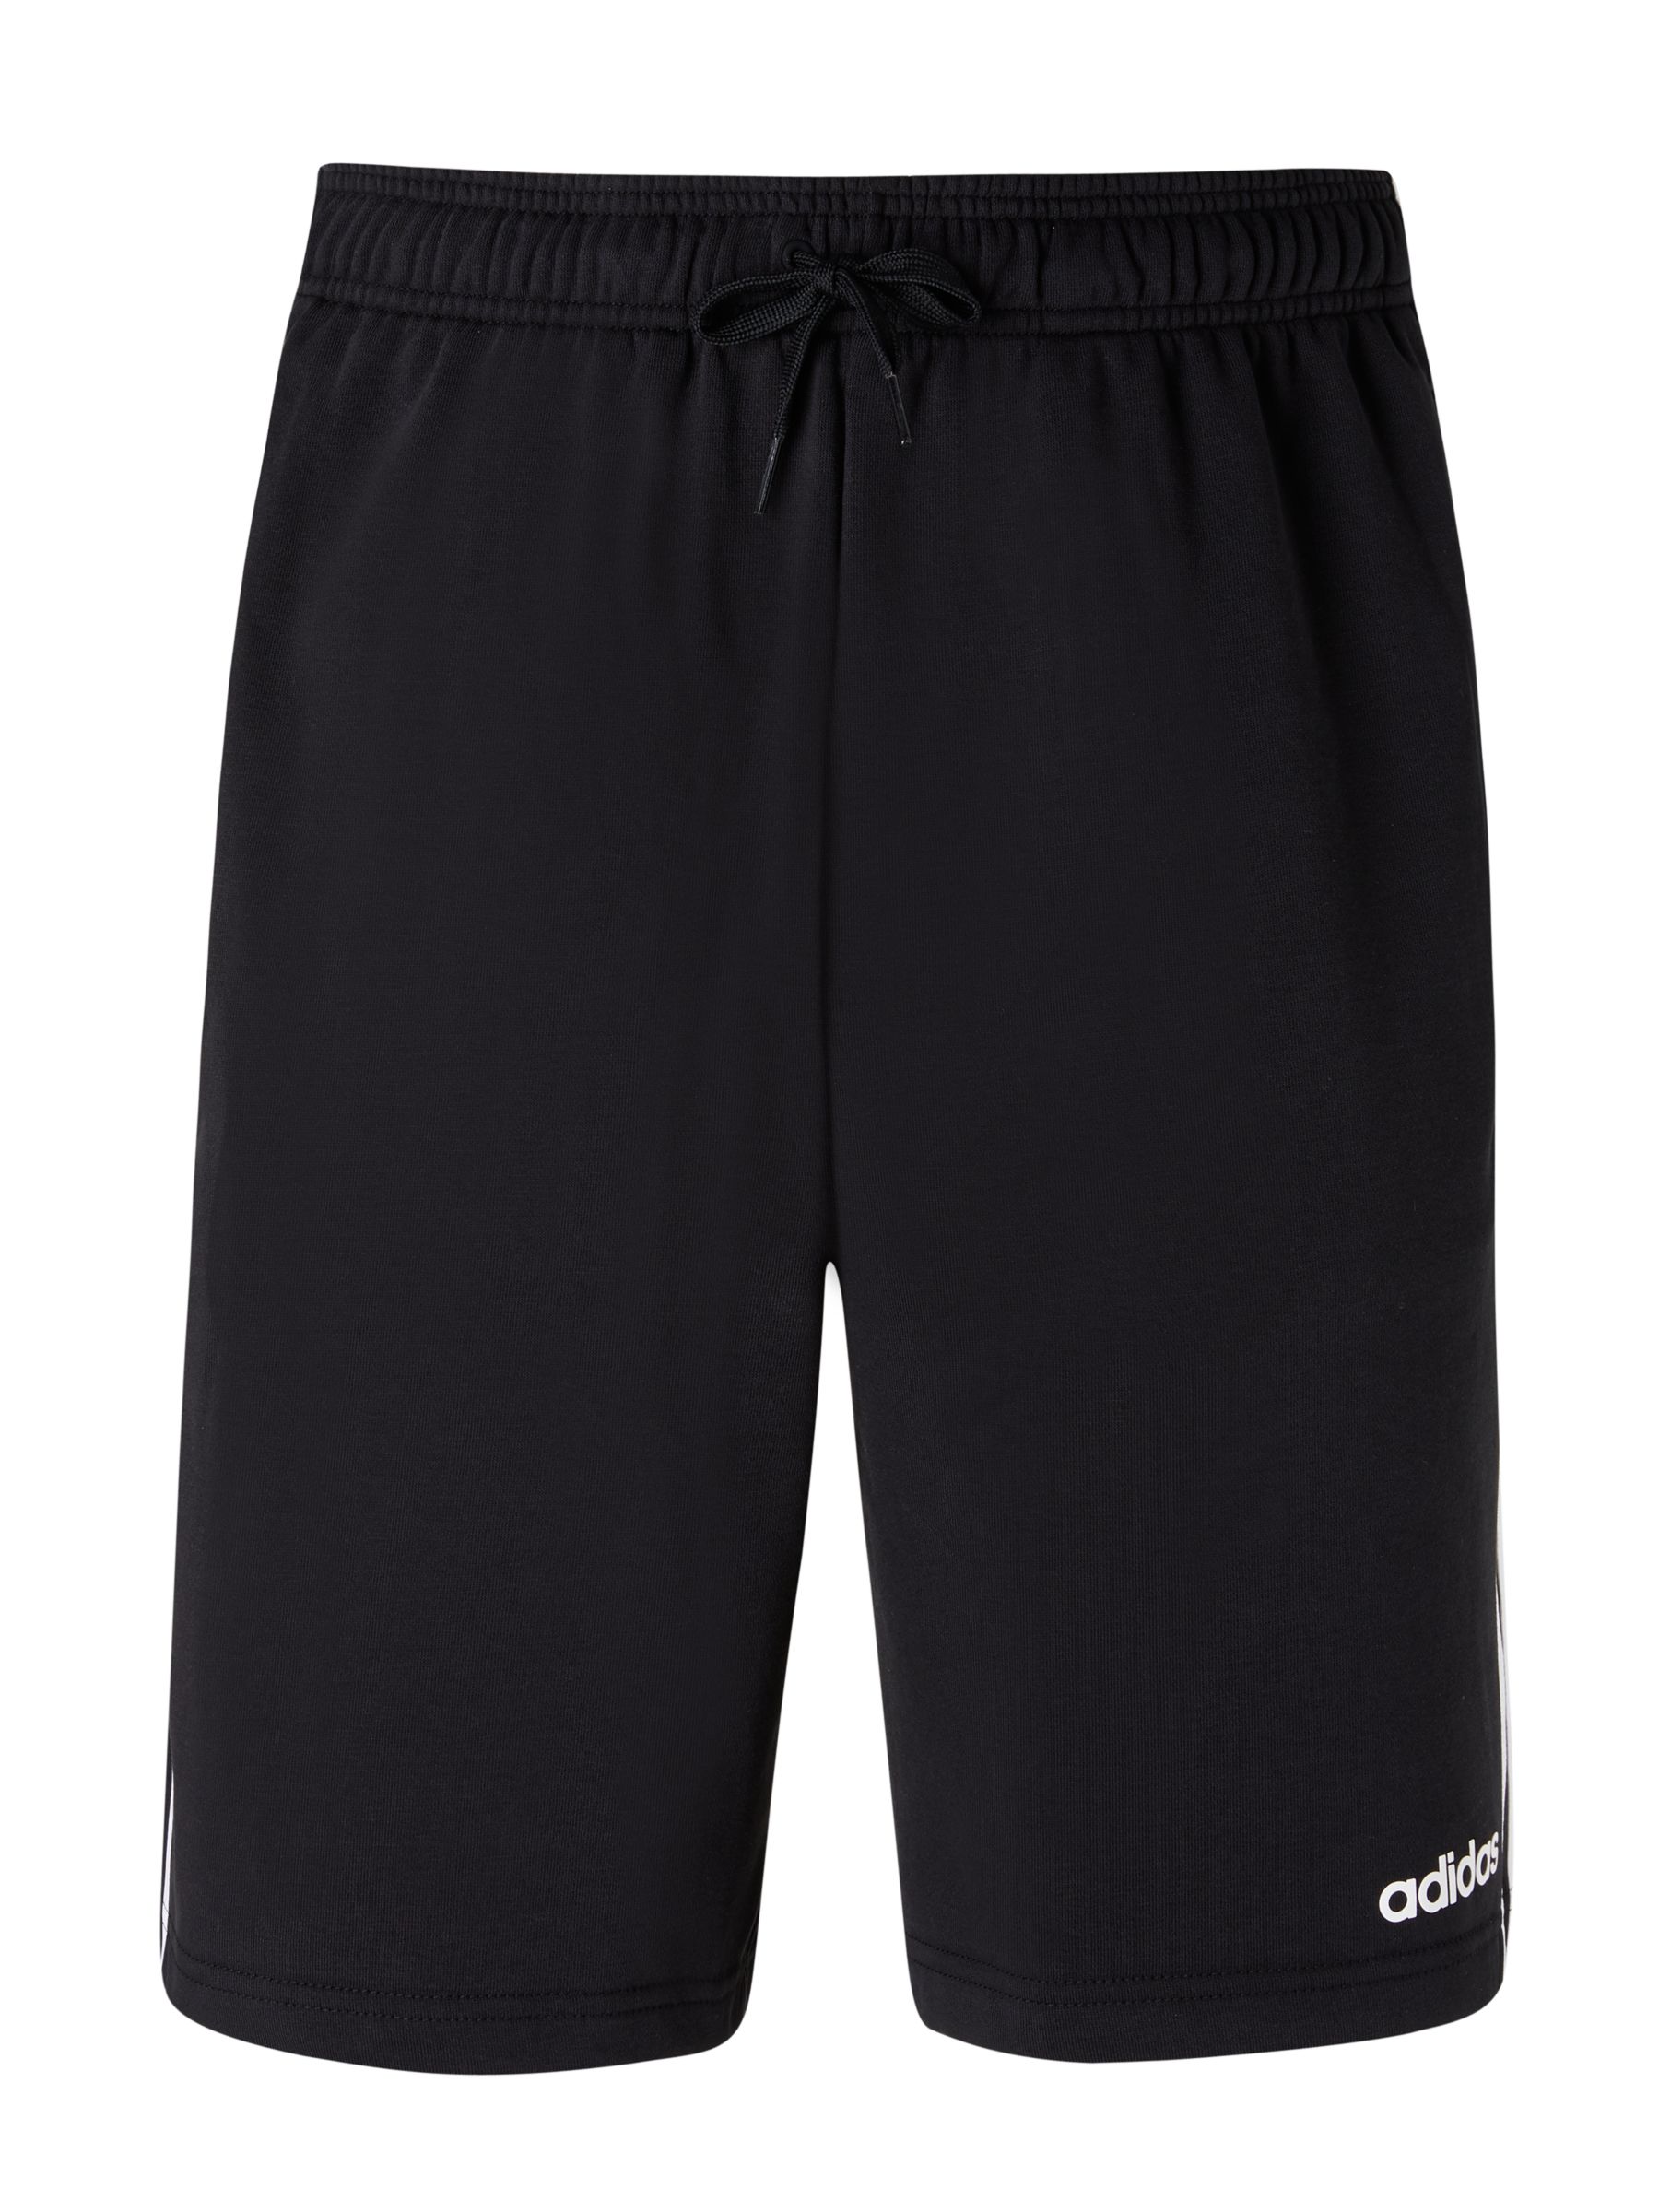 adidas french terry shorts mens